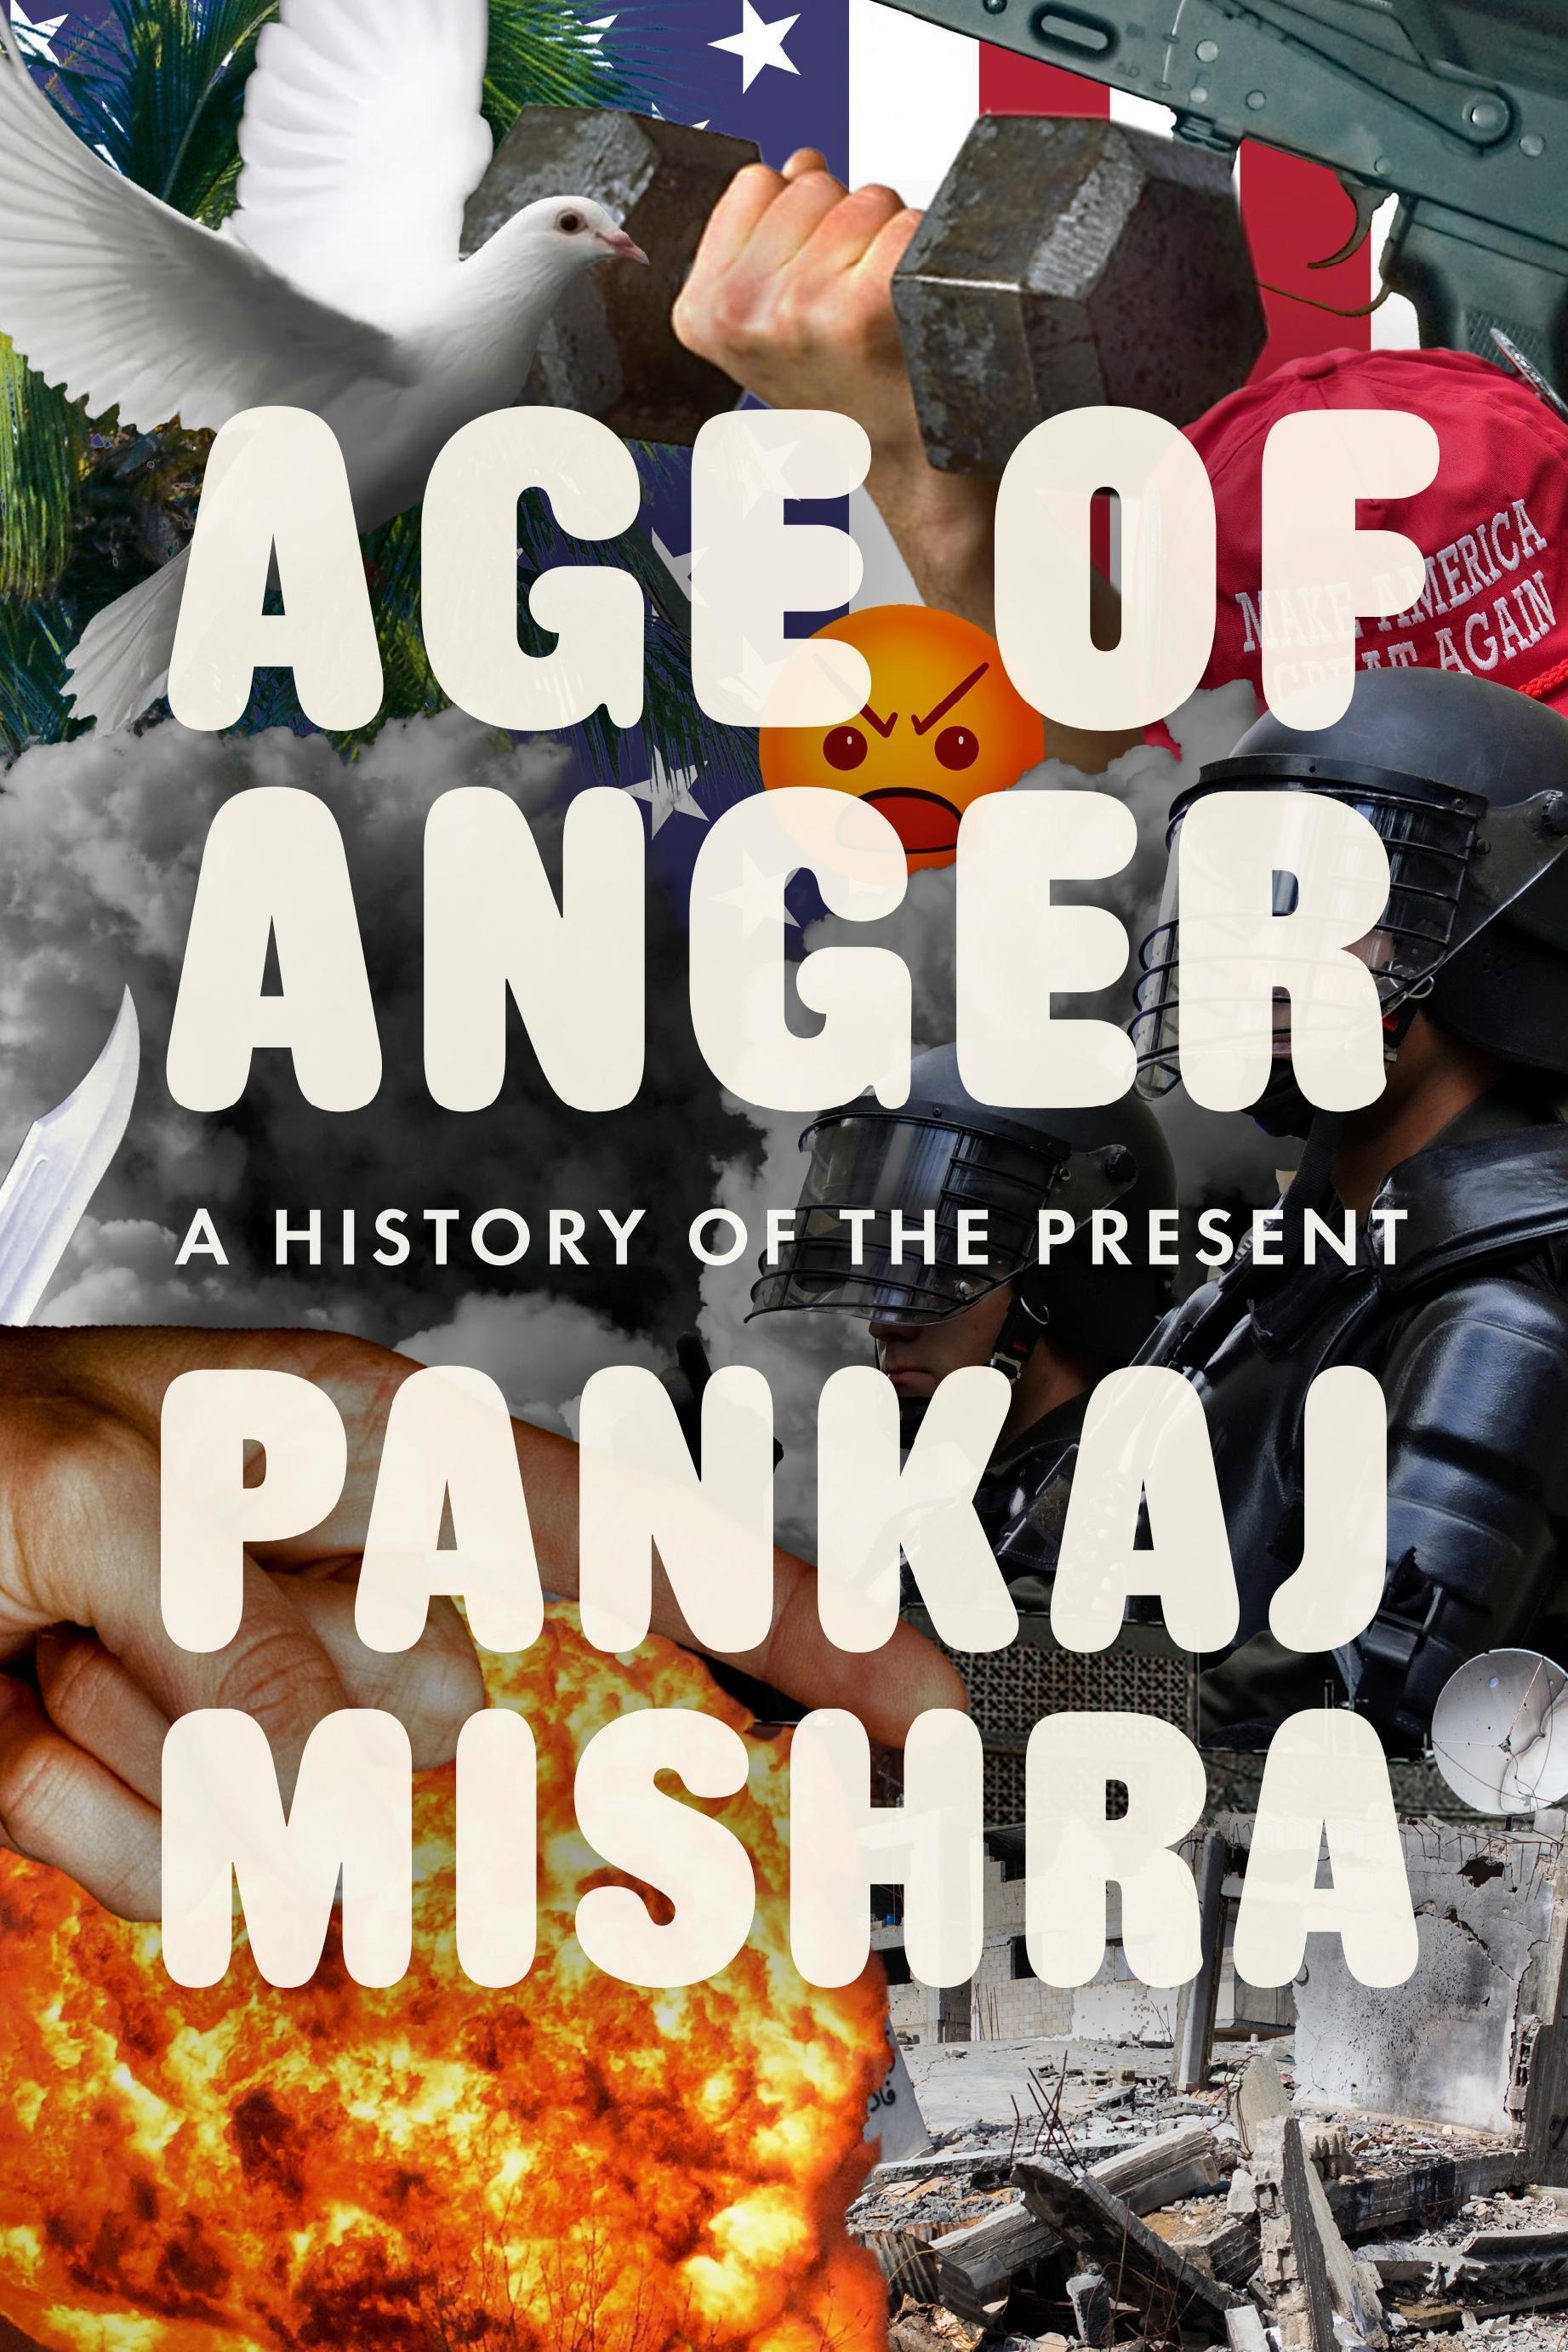 Pankaj Mishra′s "Age of Anger: the history of the present" (published by Allen Lane)